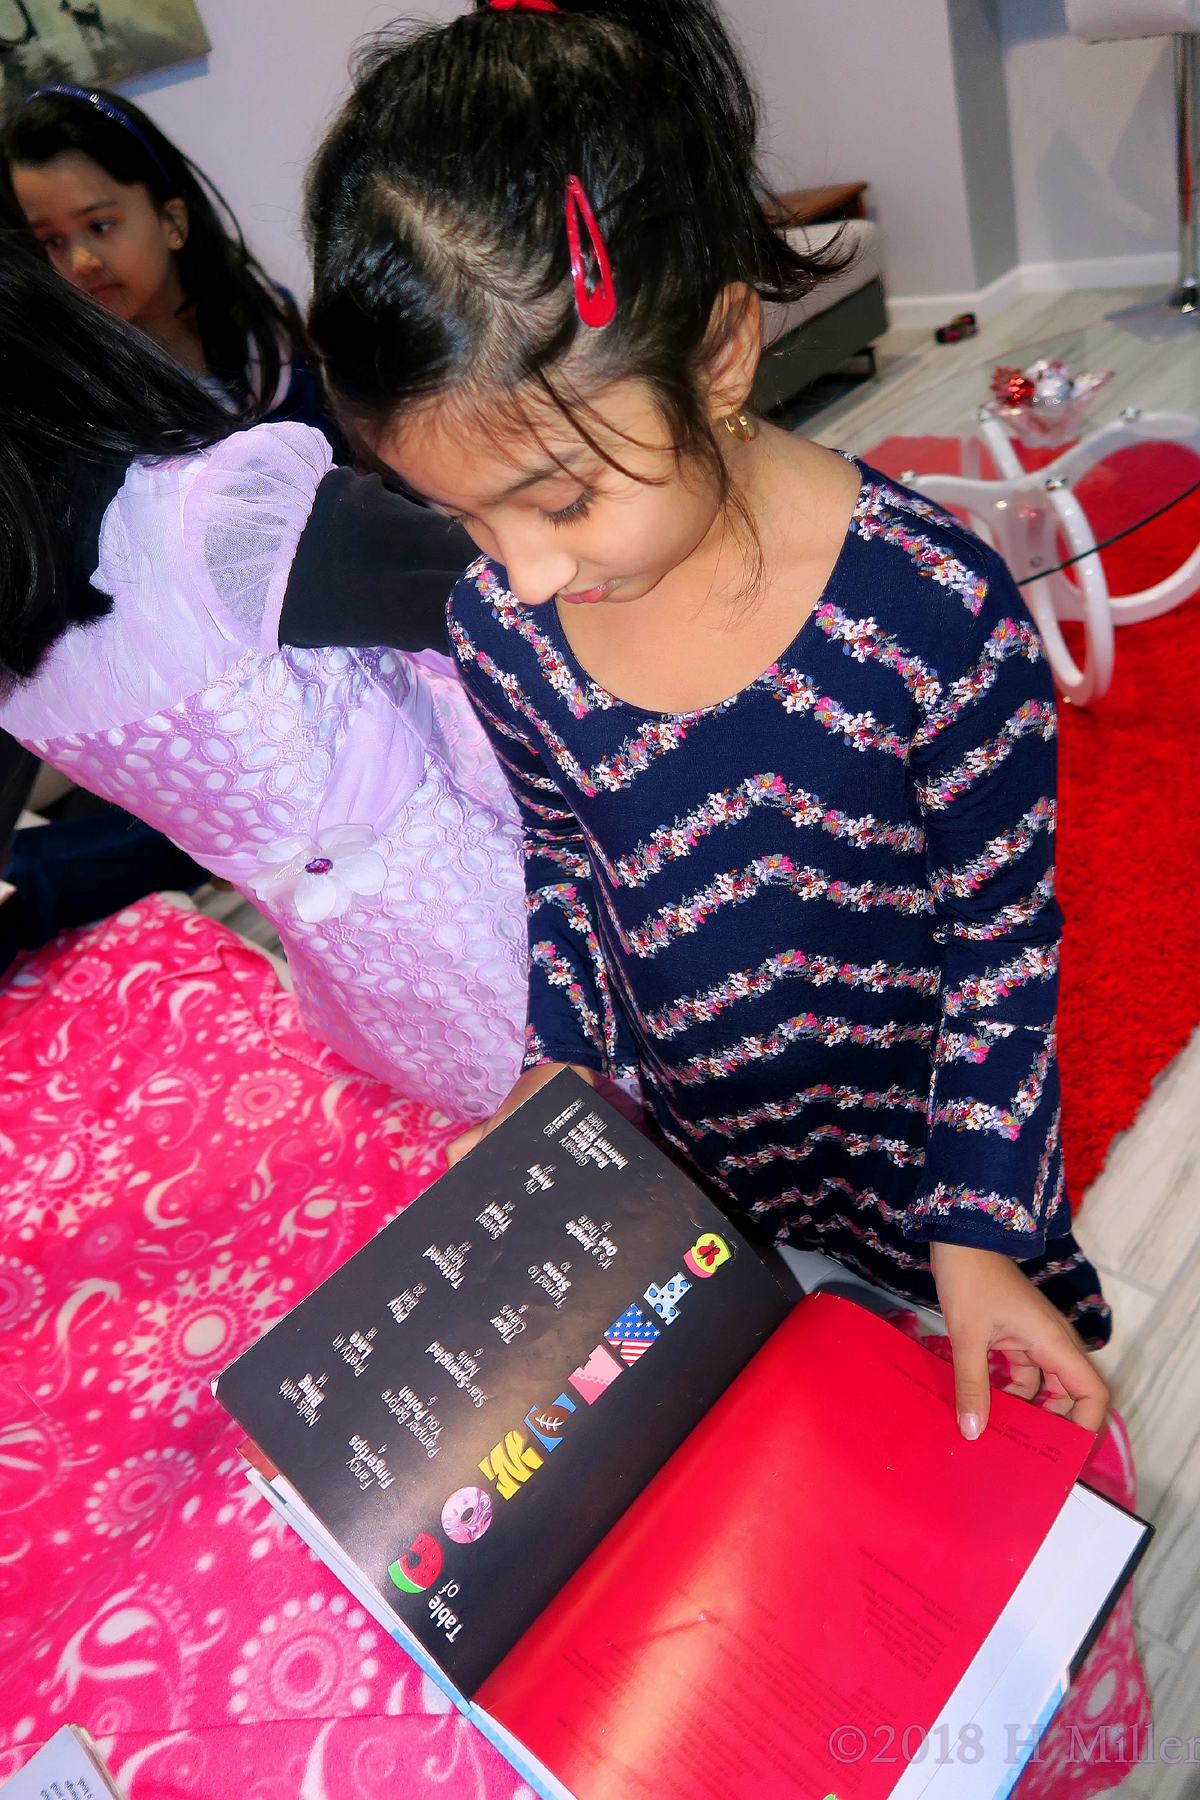 Party Guest Checking Out Nail Art Book For Ideas For Her Mini Mani 